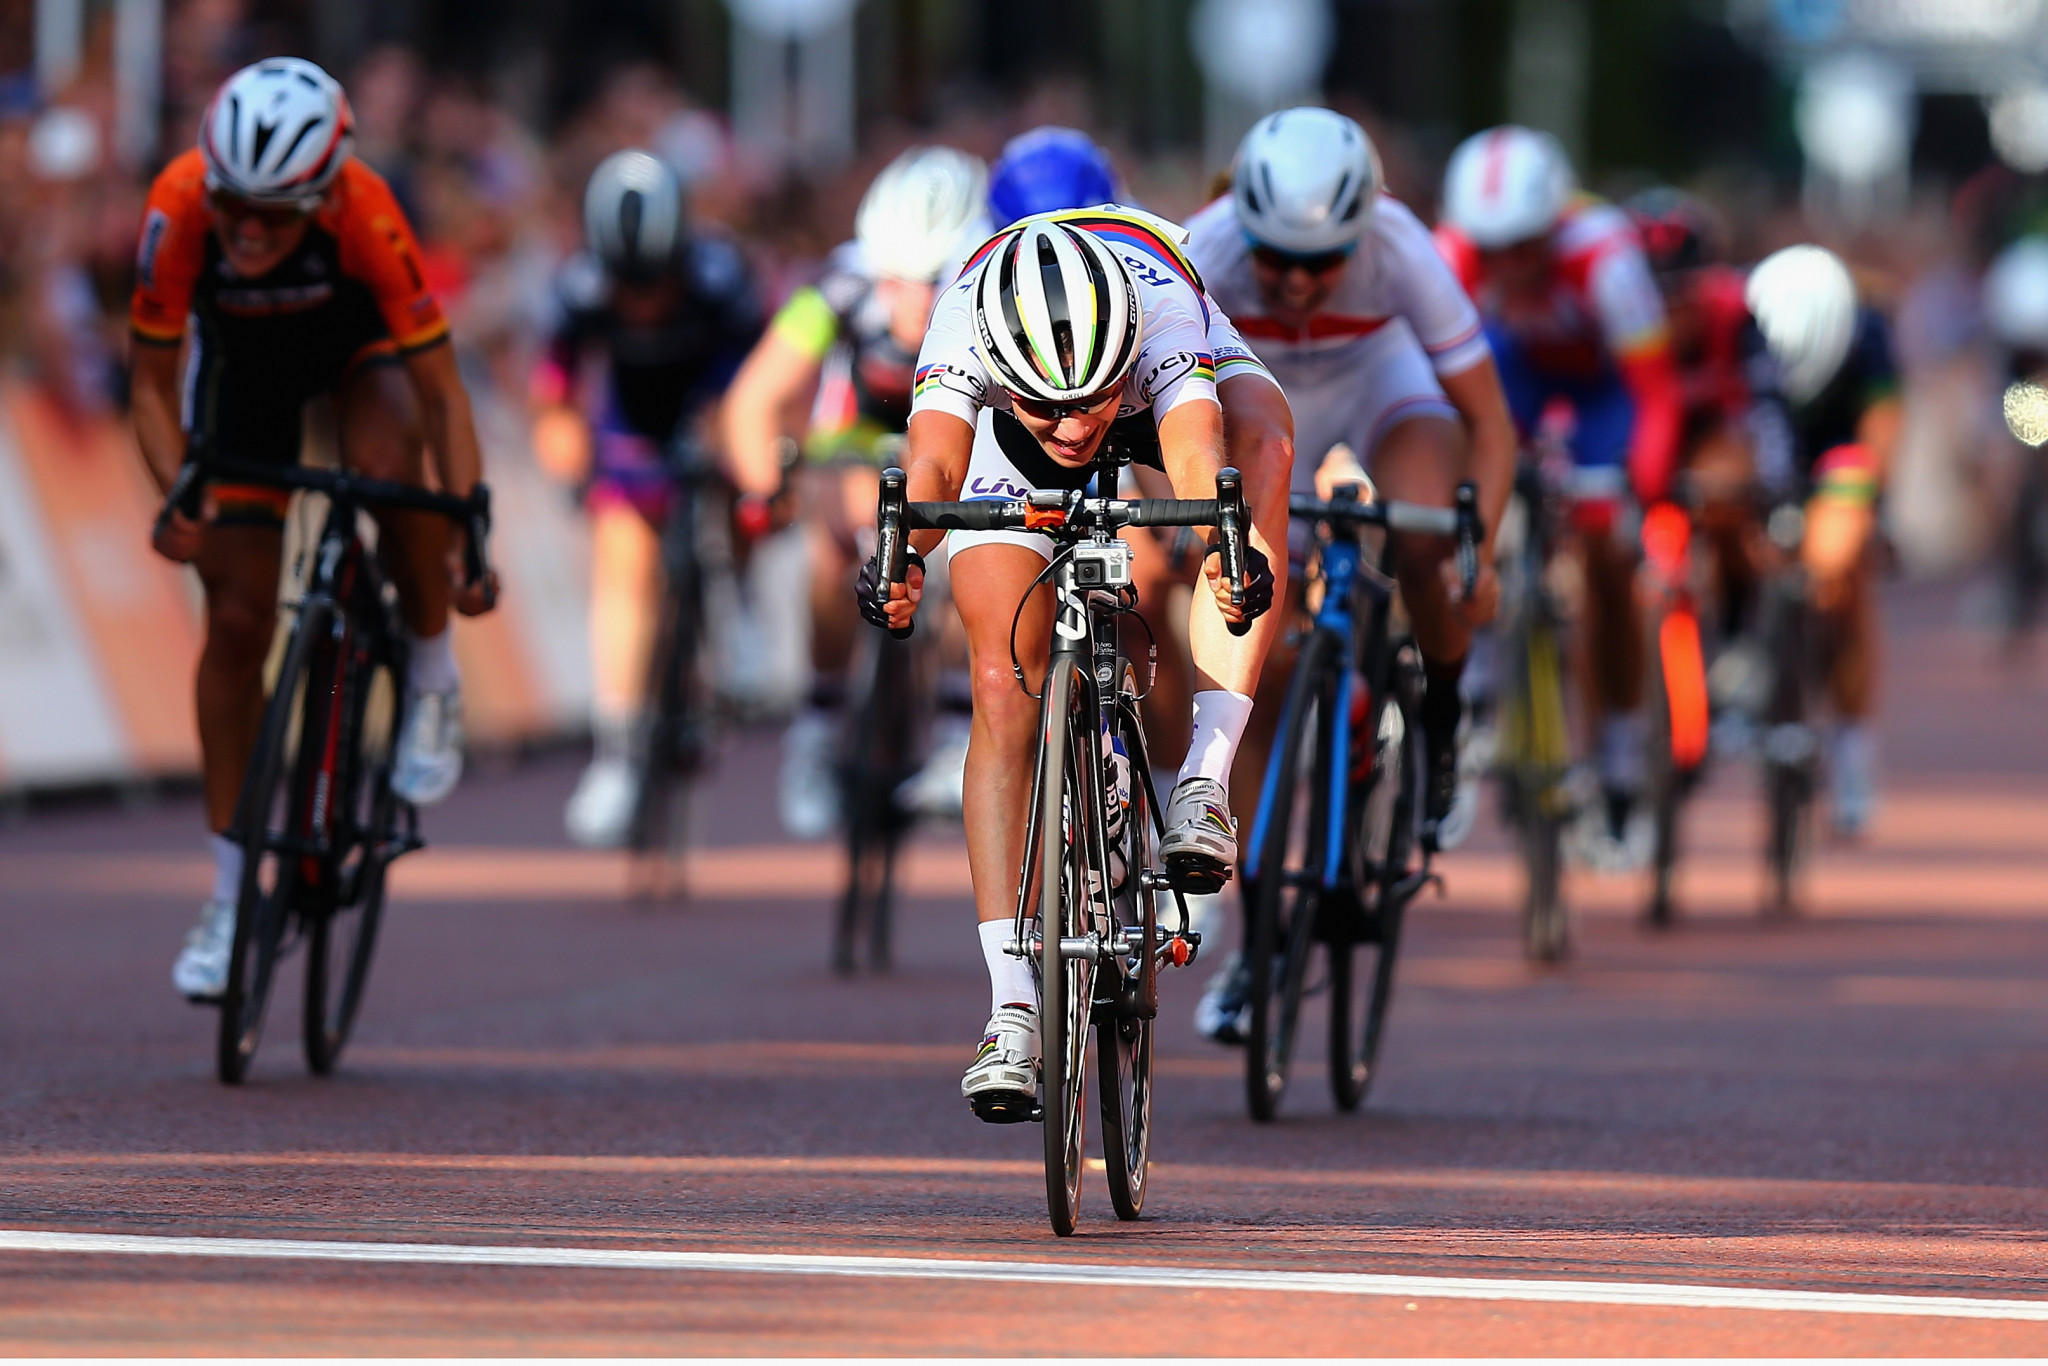 The eighth edition of RideLondon has been cancelled due to the ongoing coronavirus pandemic ©Getty Images